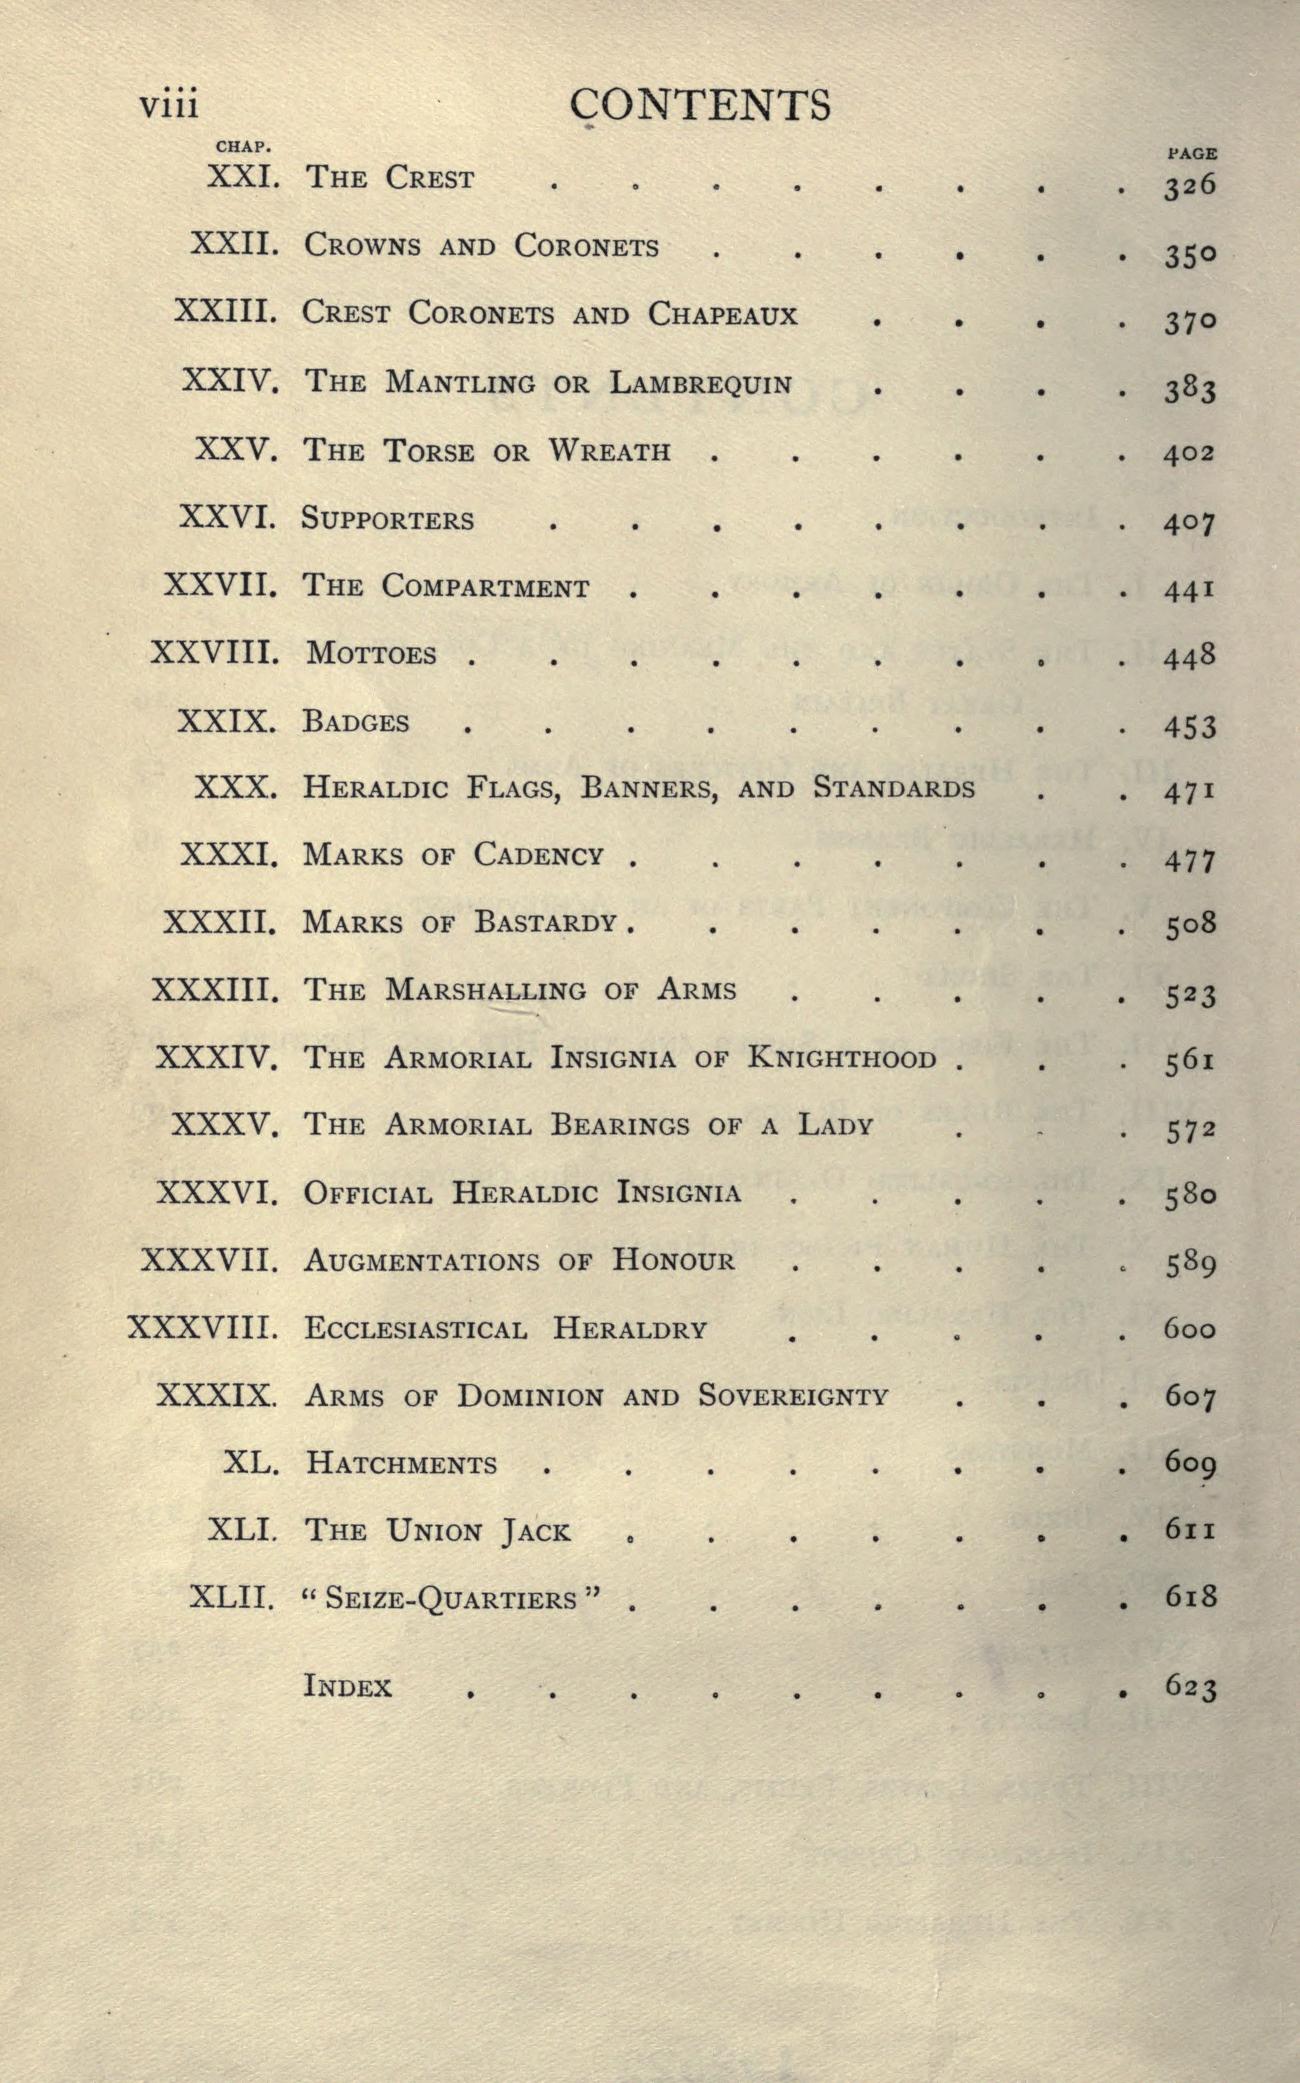 Image of A Complete Guide To Heraldry 1909 Contents Page2